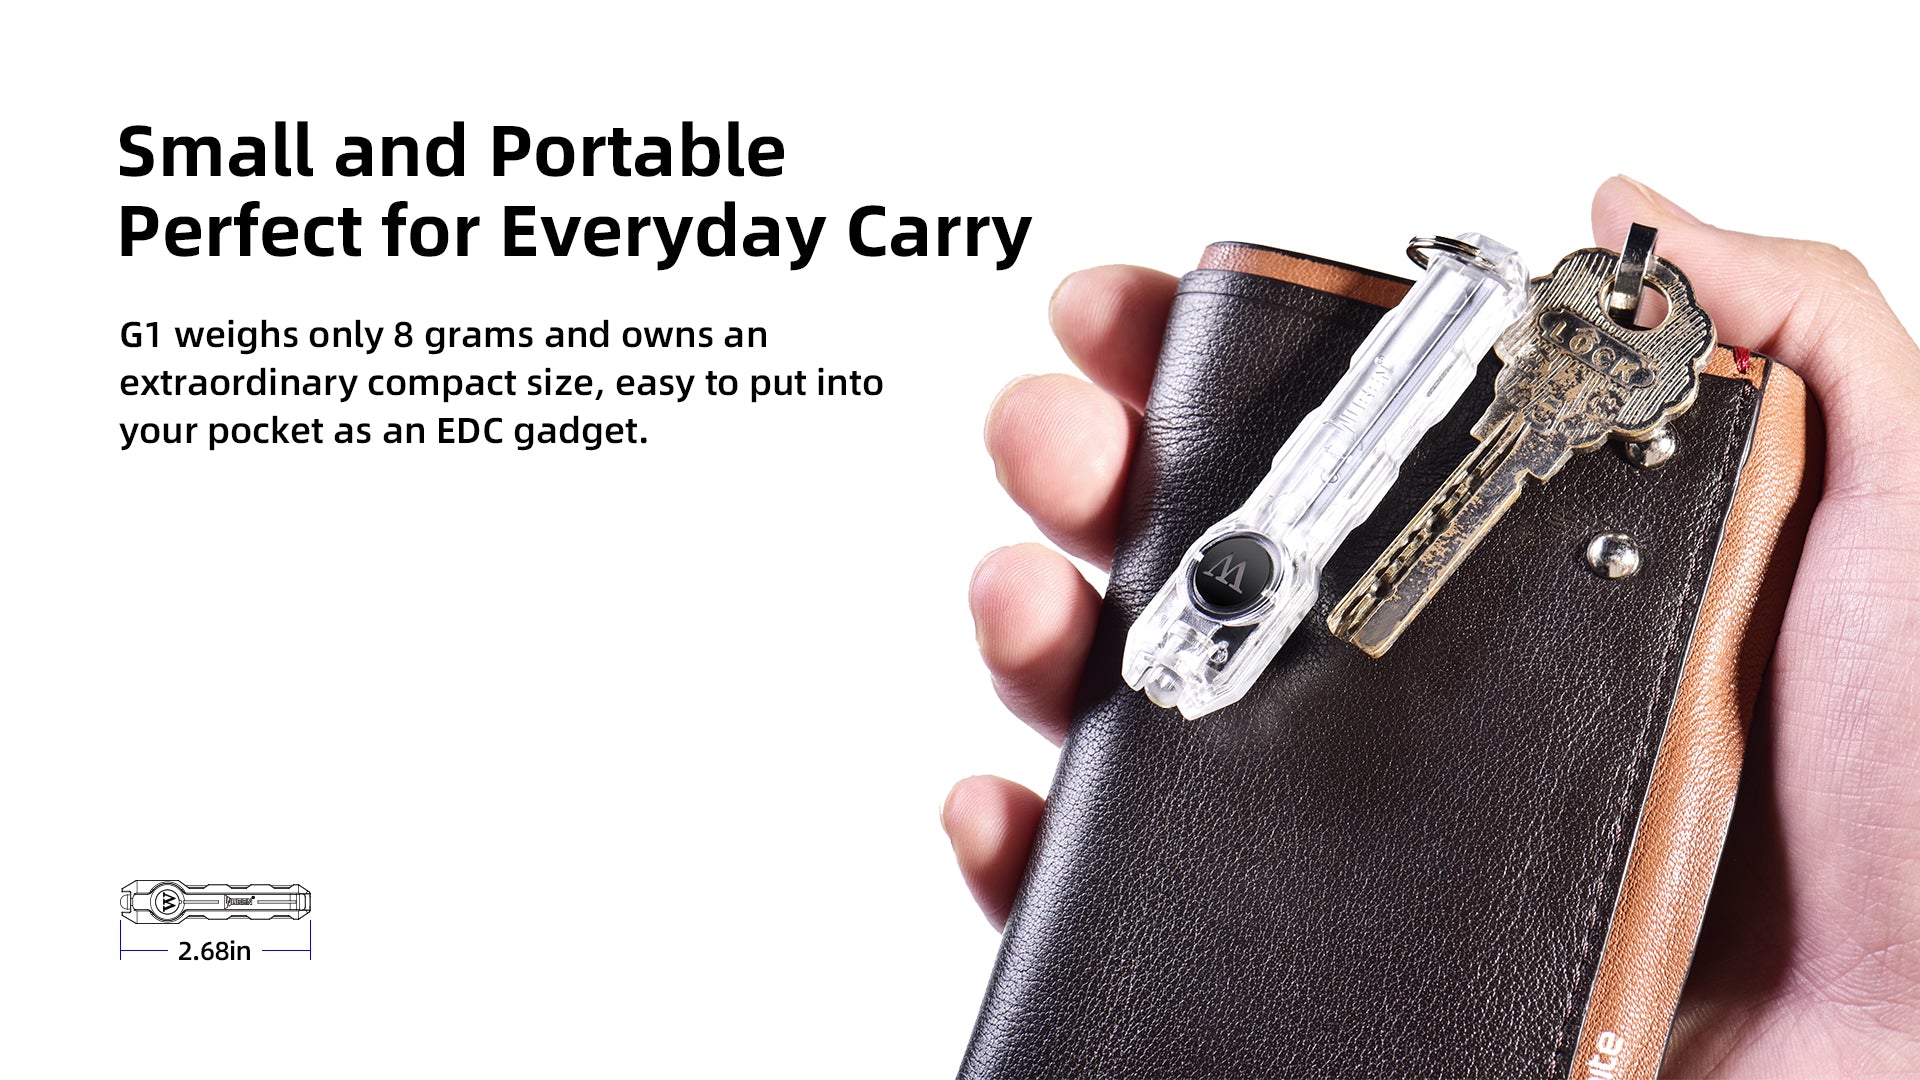 Small and Portable Perfect for Every day Carry